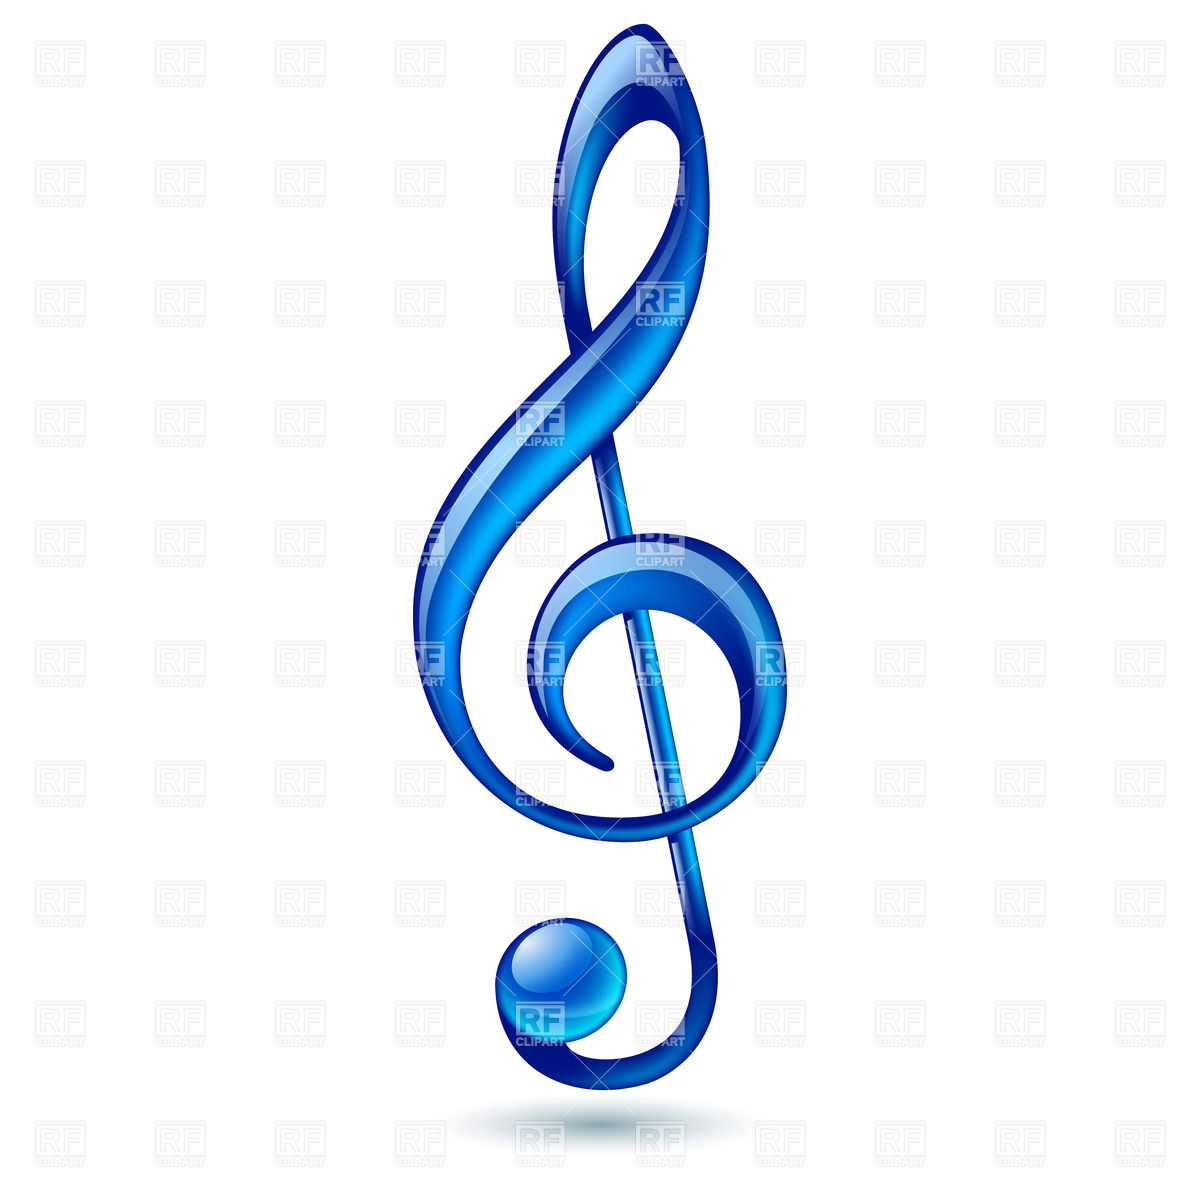     Treble Clef On White Background Download Royalty Free Vector Clipart